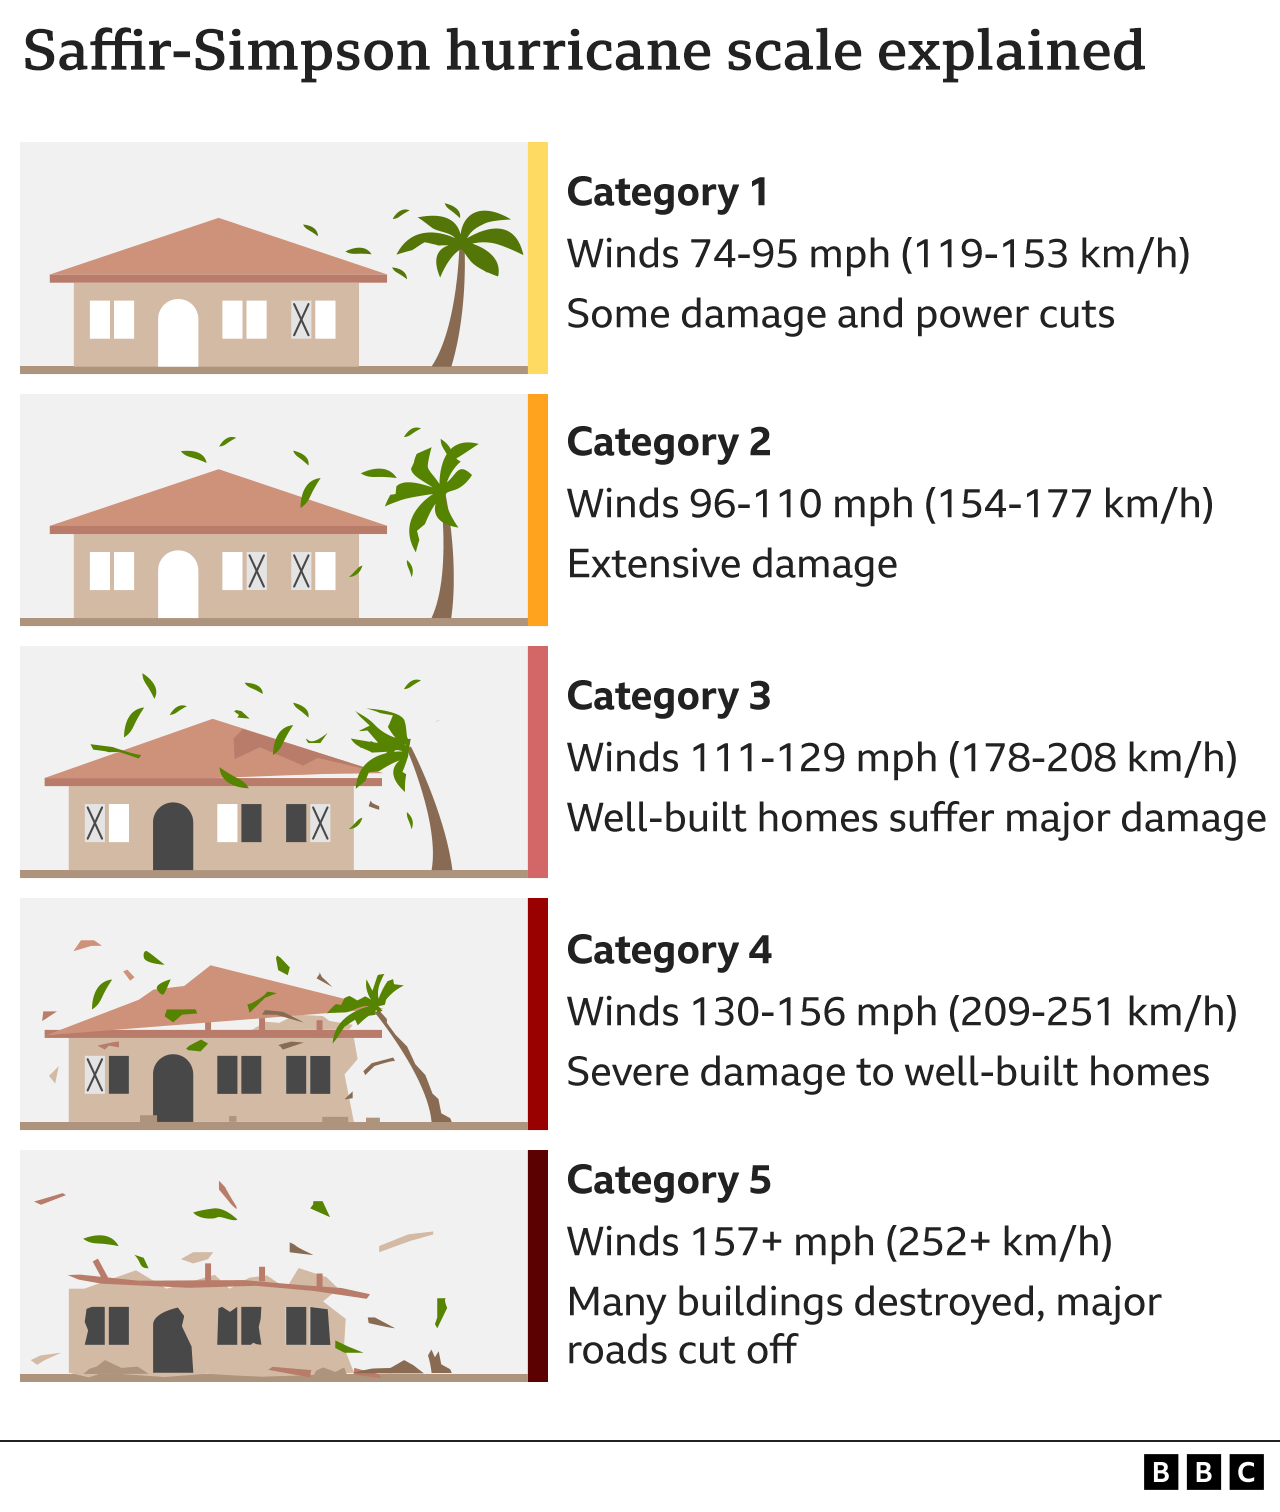 Saffir-Simpson Scale: How strong are the winds in each hurricane category?